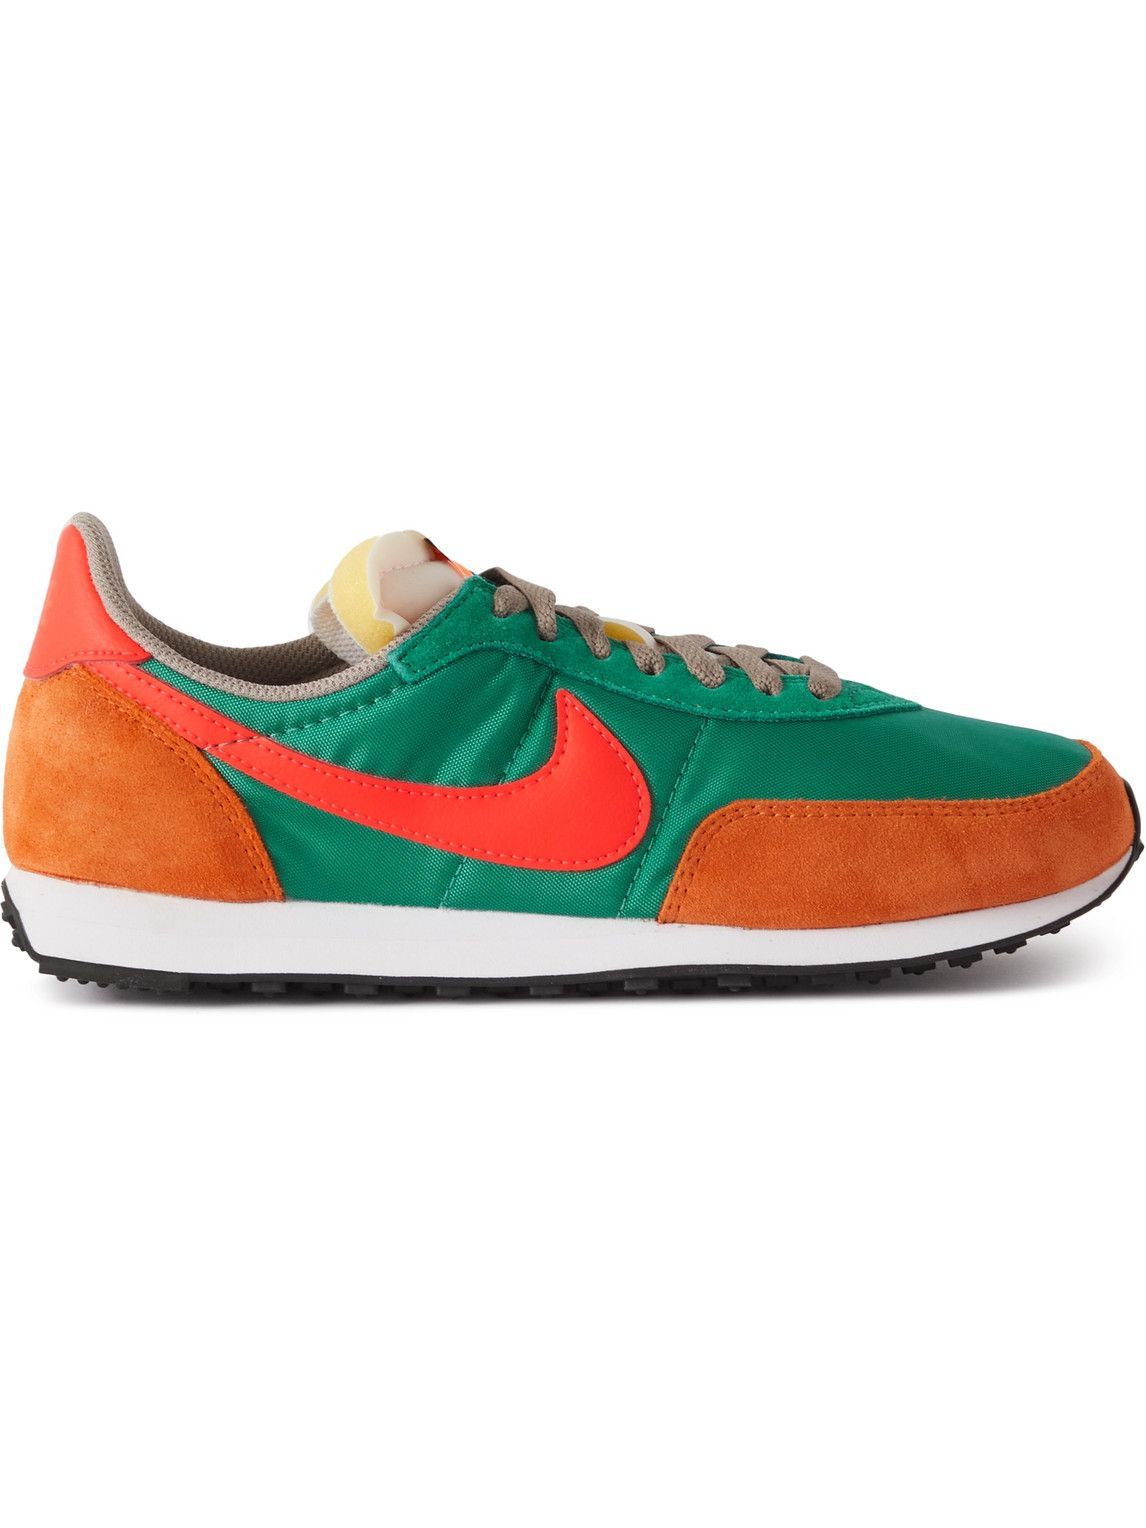 Photo: Nike - Waffle 2 SP Leather and Suede-Trimmed Nylon Sneakers - Green